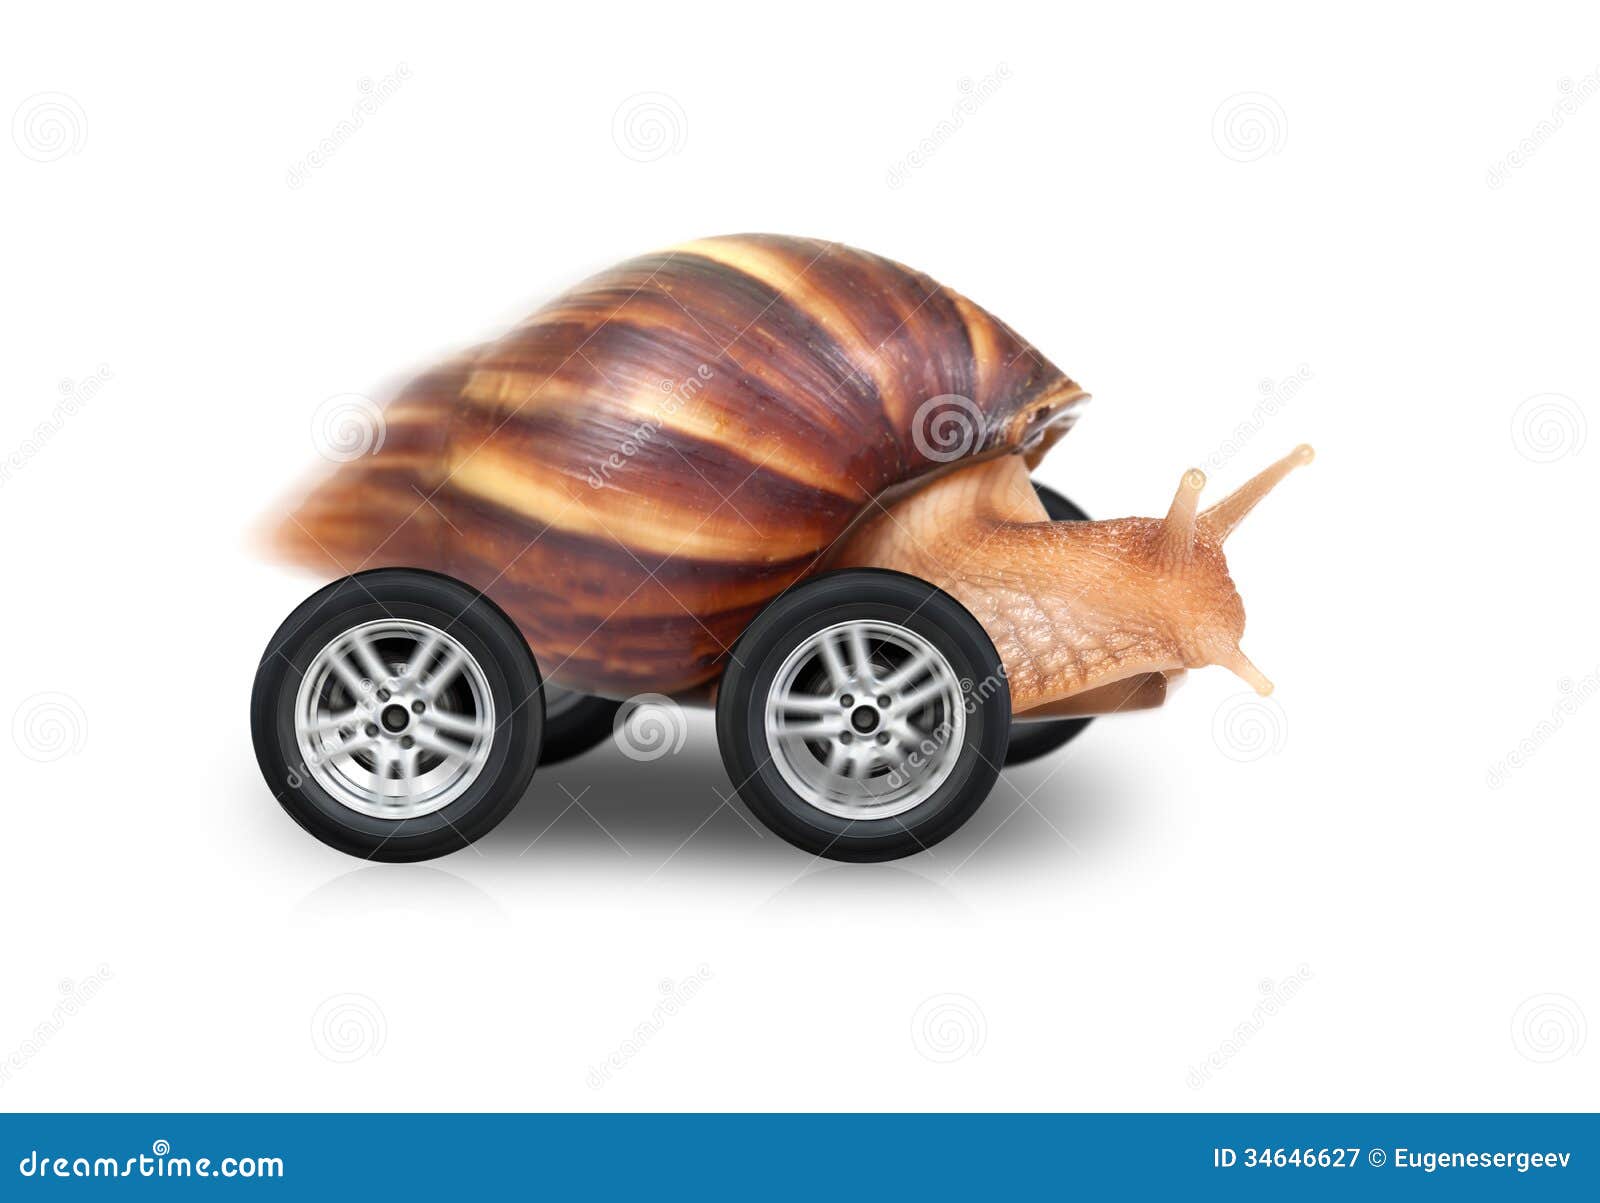 big-brown-snail-fast-driving-wheels-isol